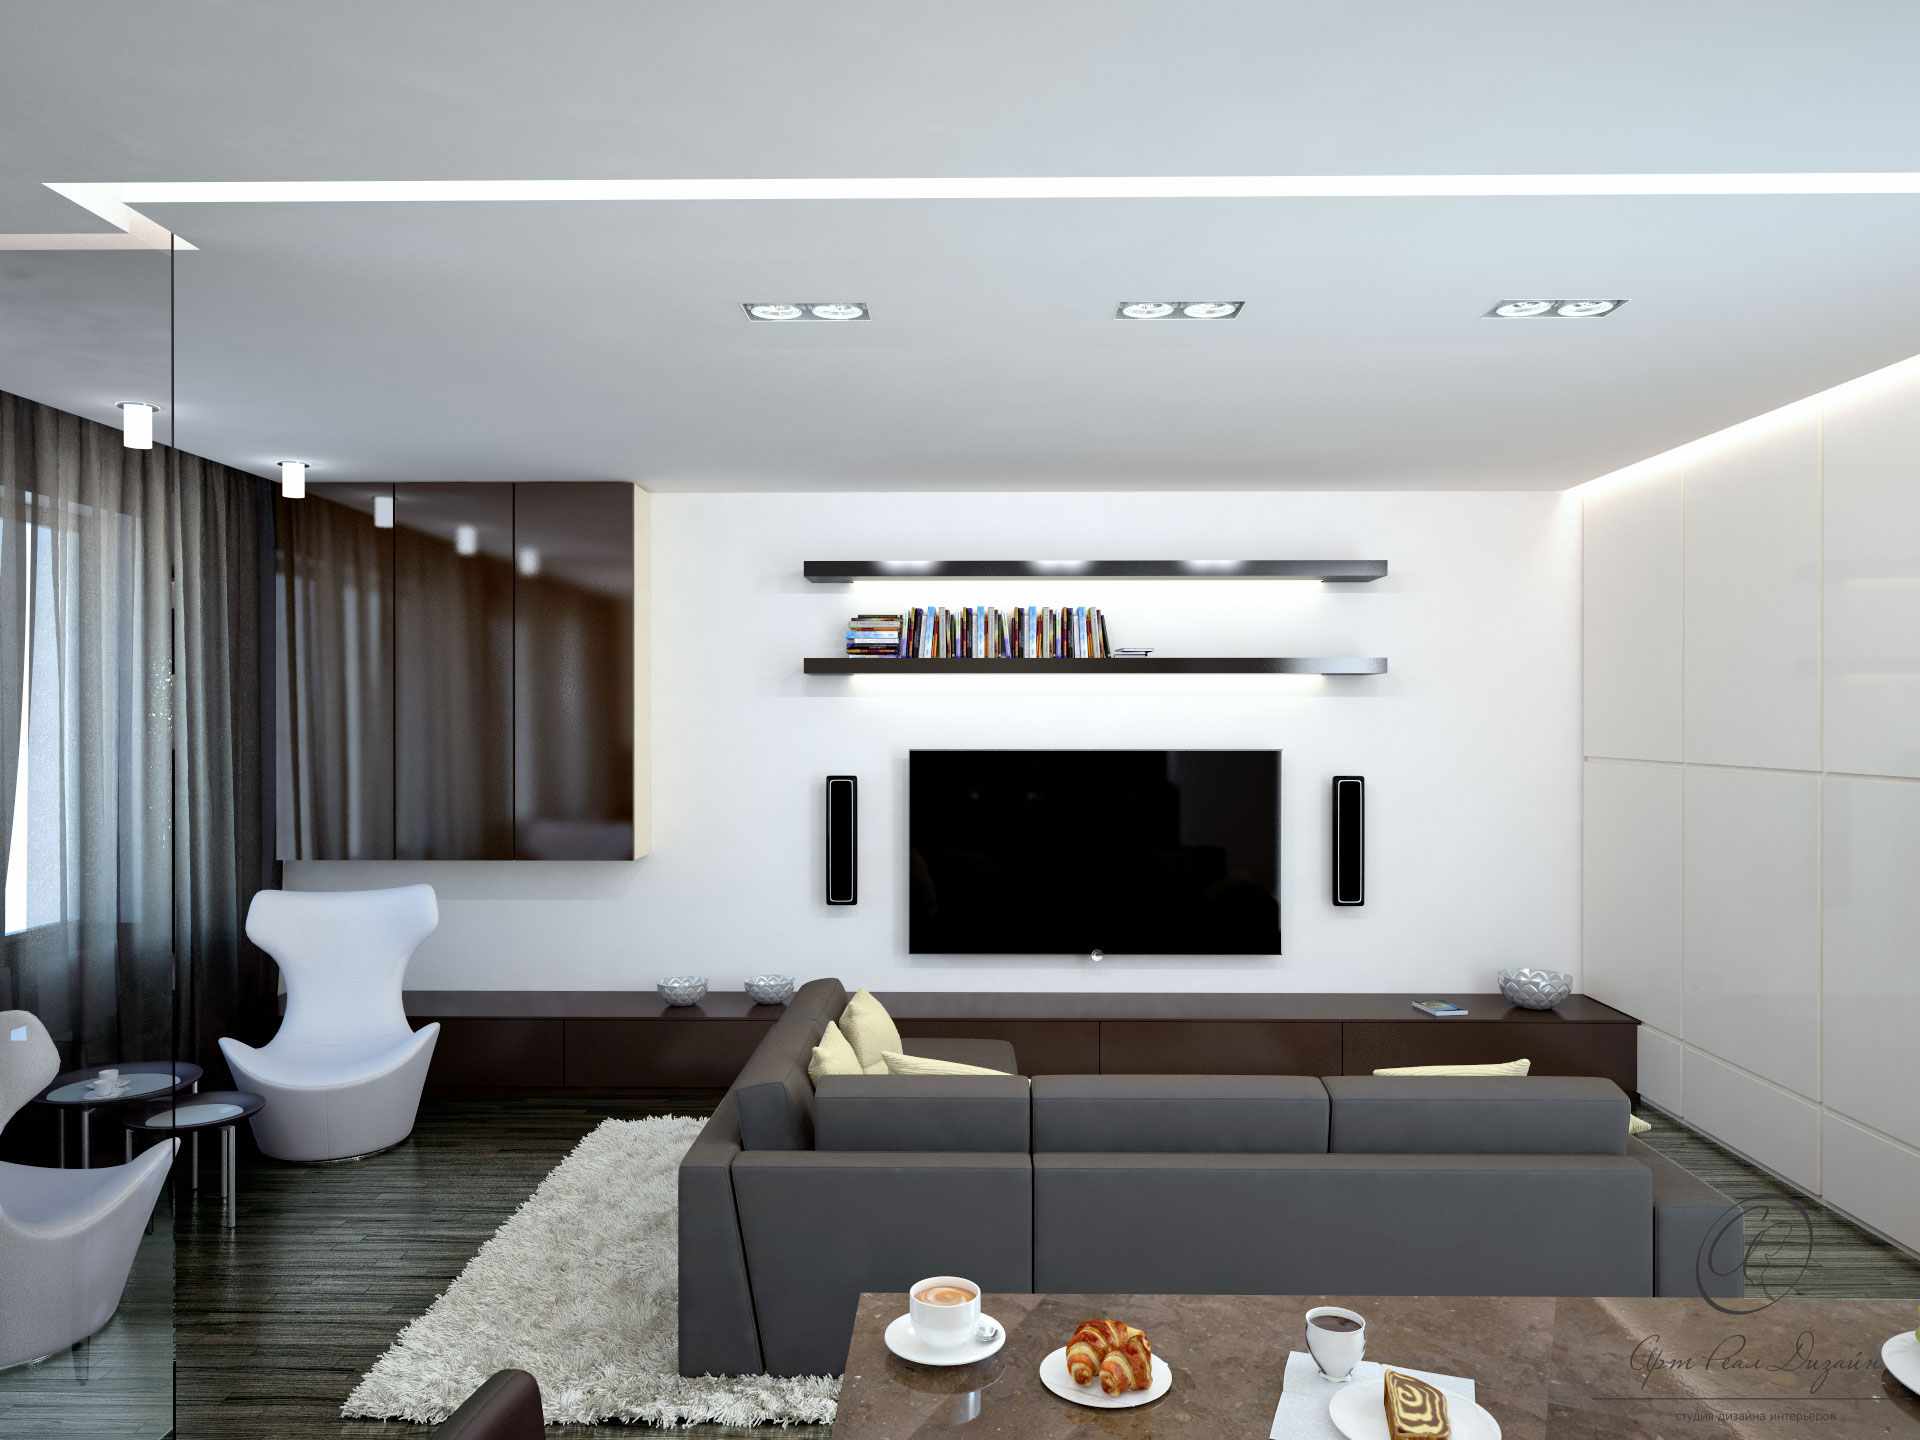 Minimalism for Living Room: Laconic Practical Design. Flat TV and open shelves on the white wall